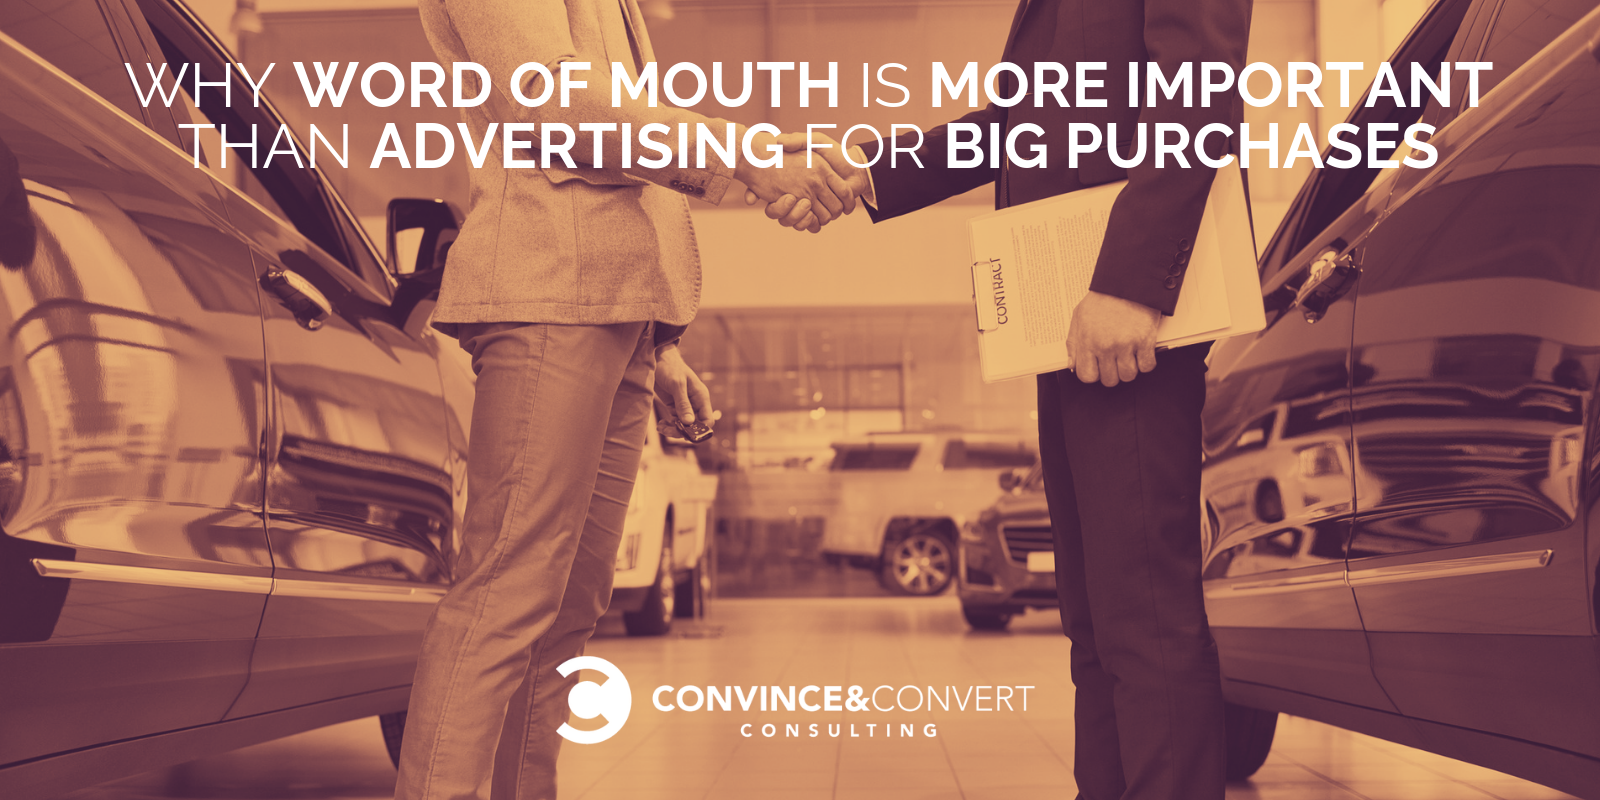 word of mouth vs advertising big purchases